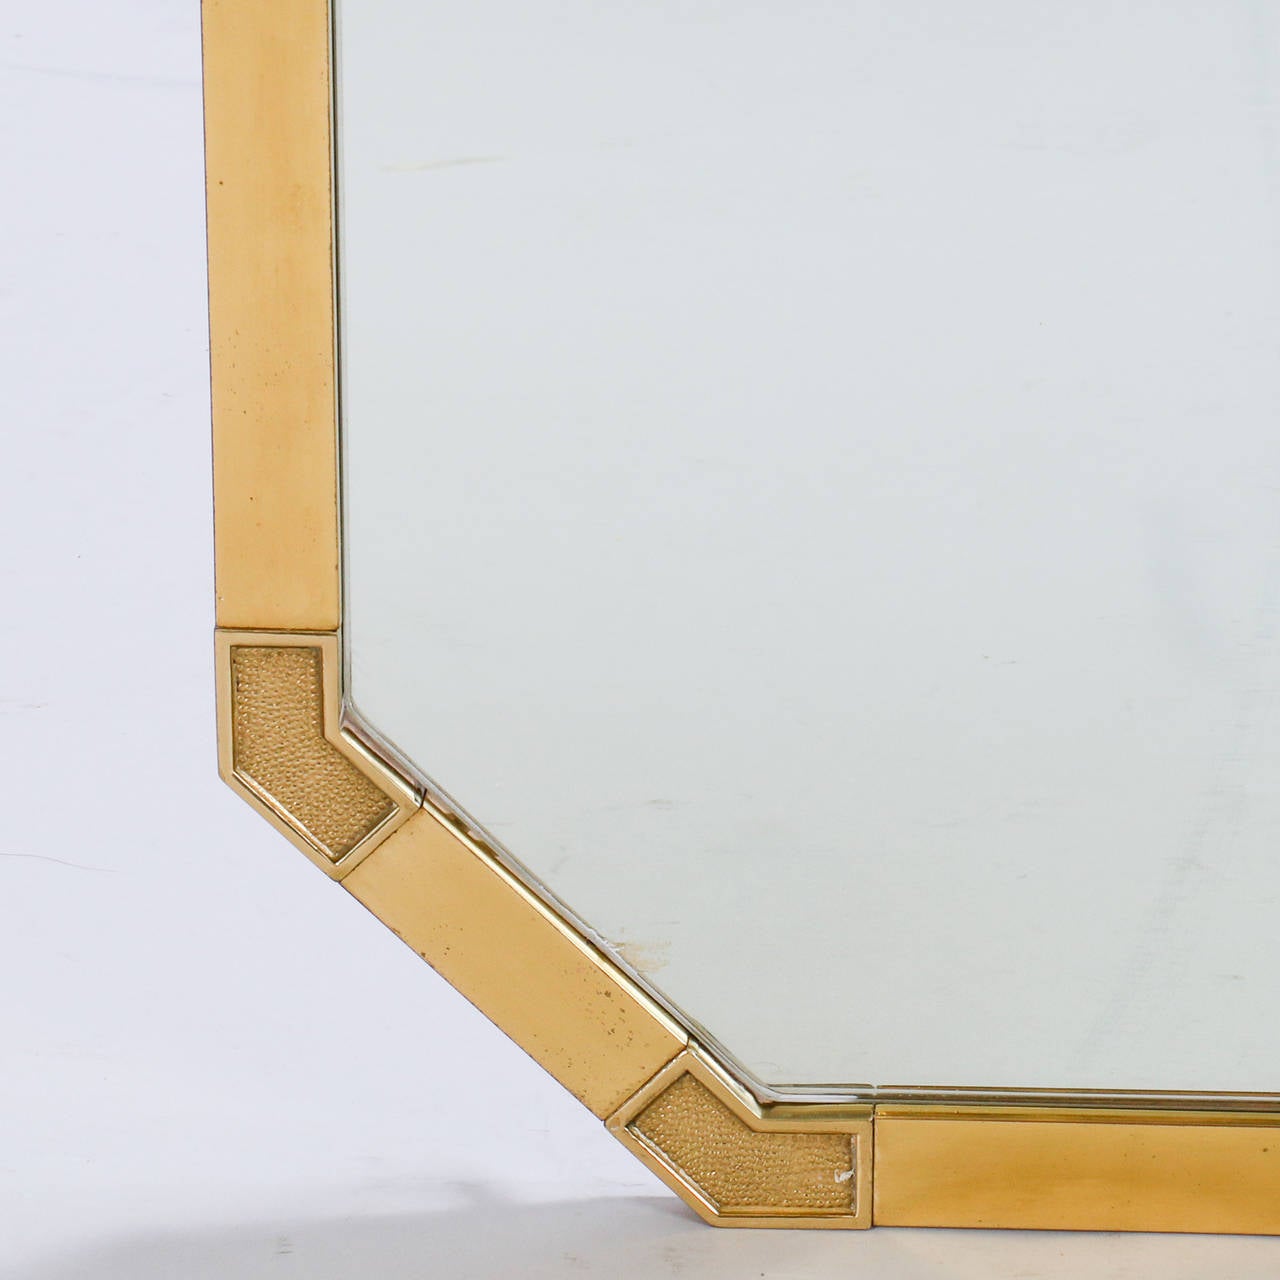 Found in Italy, this circa 1960s large rectangular mirror has a flat, brass frame with textured surface details at the angled corners.